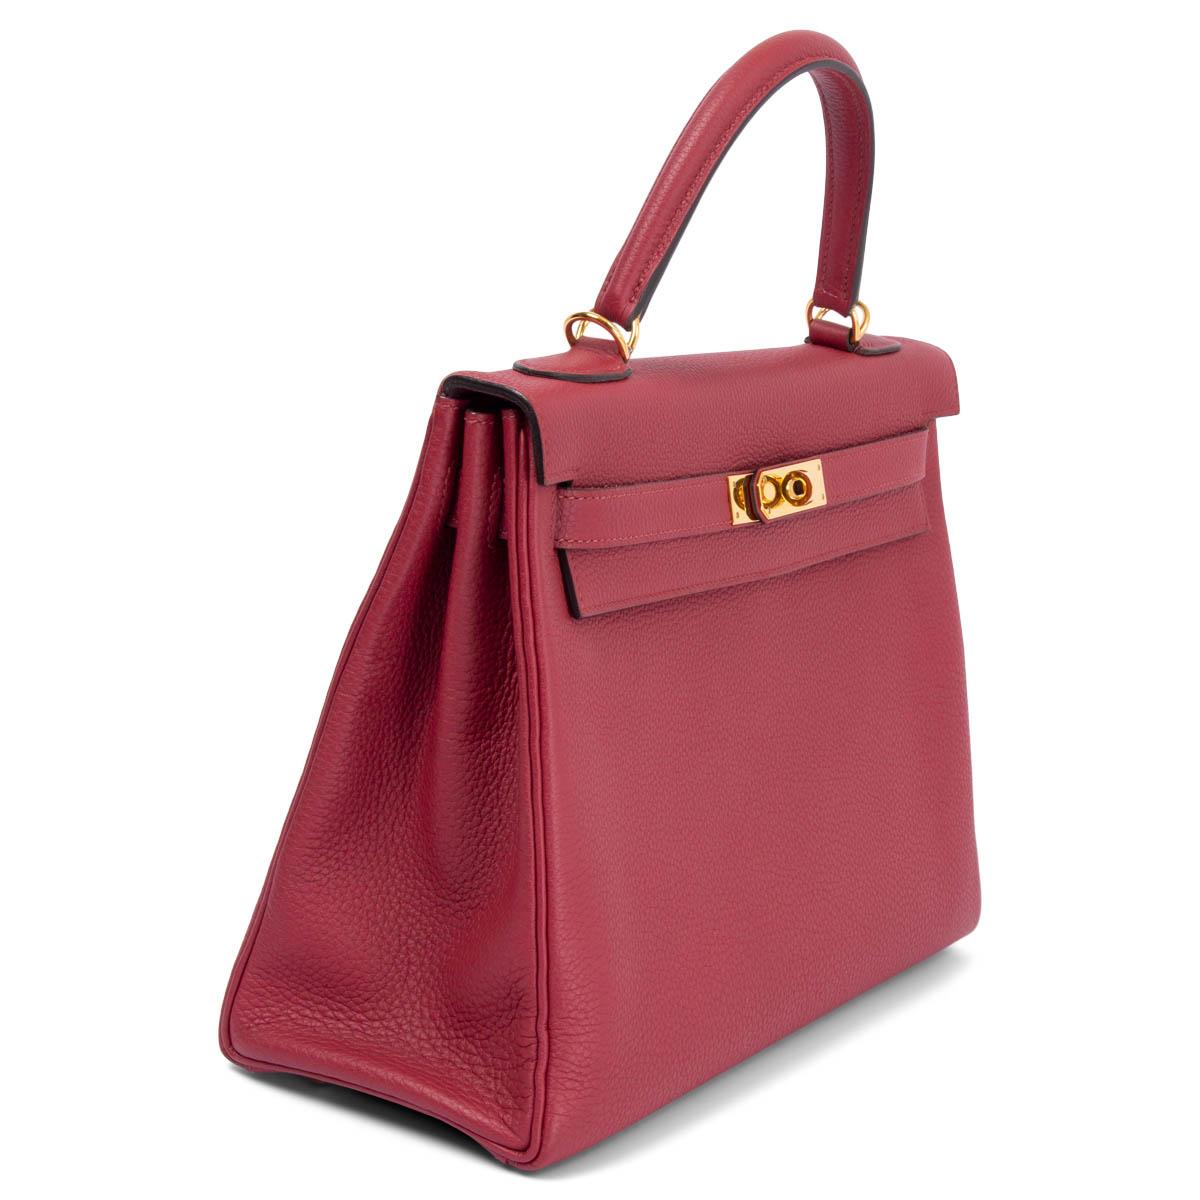 100% authentic Hermès Kelly 32 Retourne bag in Rouge Grenat Veau Togo leather with gold-tone hardware. Lined in Cherve (goat skin) with two open pockets against the front and a zipper pocket against the back. Has been carried and is in excellent